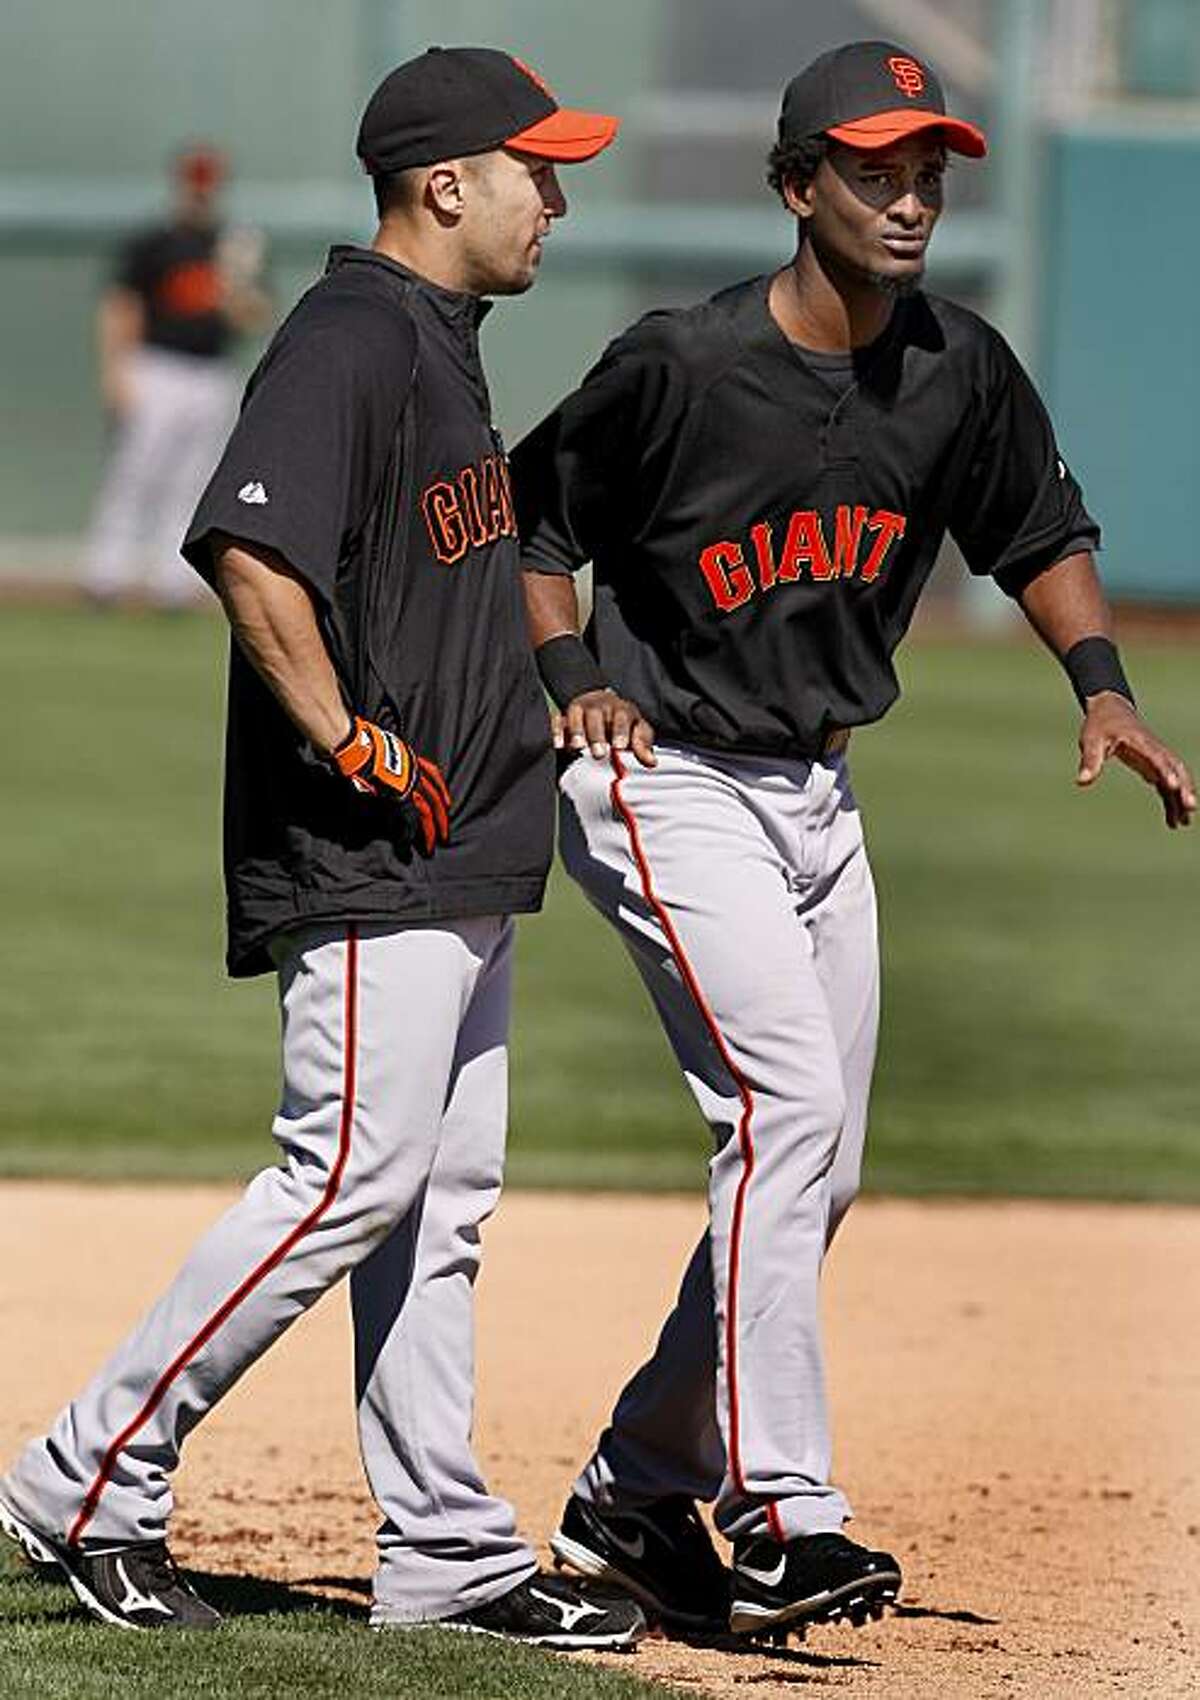 Giants speedsters Andres Torres (left) and Eugenio Velez (right) during a base running drill. Annual spring training action with the San Francisco Giants and Oakland Athletics from Scottsdale and Phoenix, Arizona.